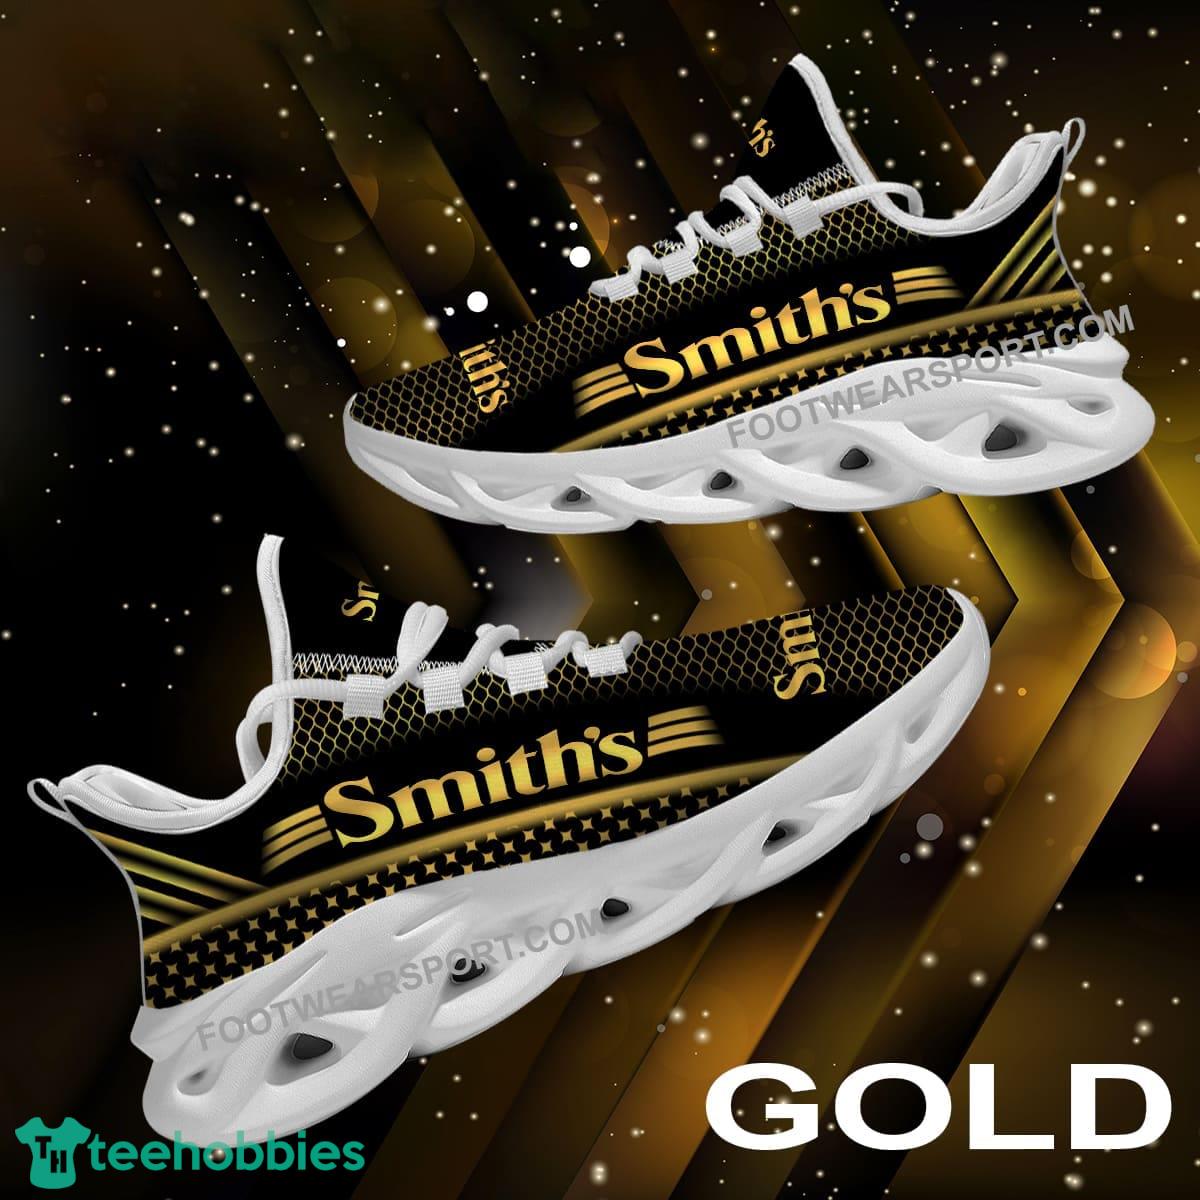 Smith's Food And Drug Max Soul Shoes Gold Running Sneaker Fresh For Fans Gift - Smith's Food And Drug Max Soul Shoes Gold Running Sneaker Fresh For Fans Gift